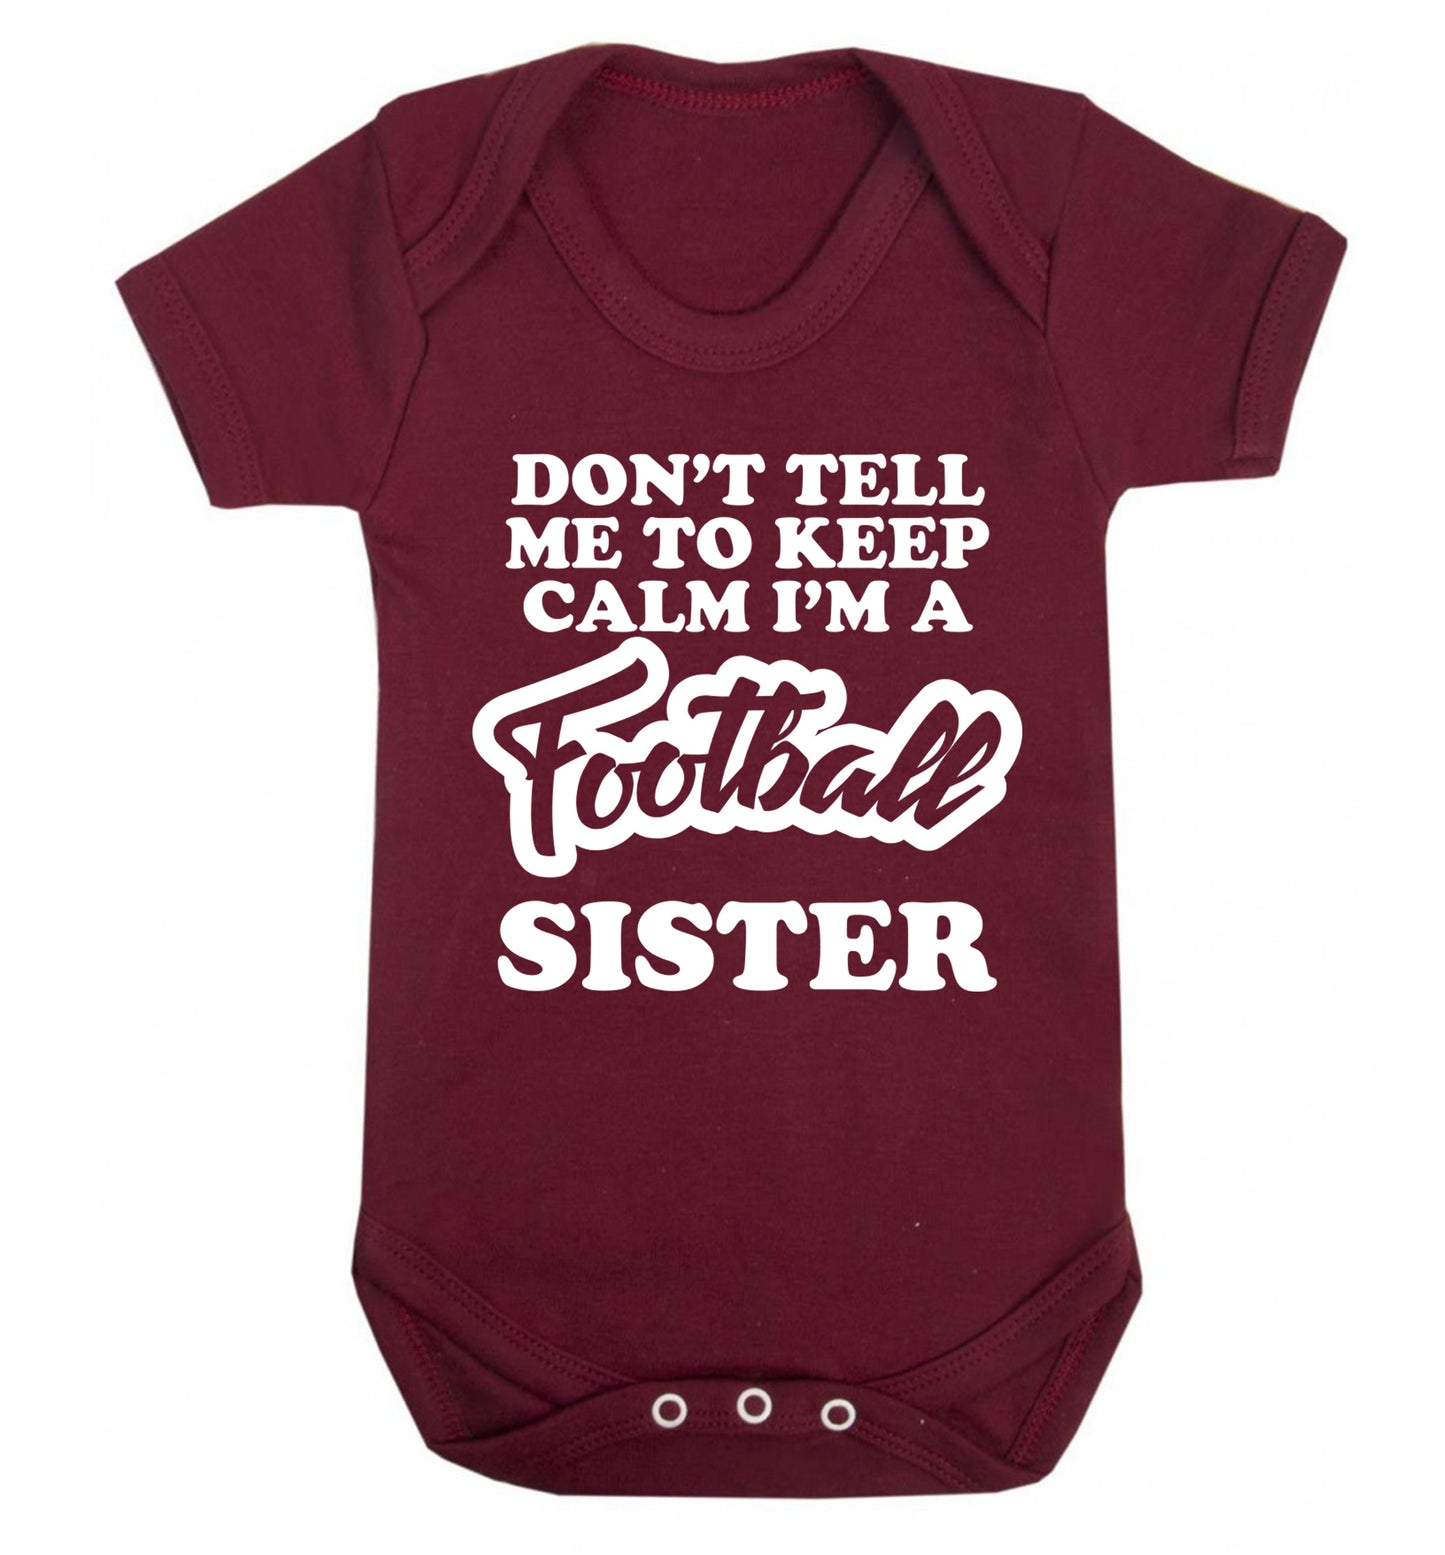 Don't tell me to keep calm I'm a football sister Baby Vest maroon 18-24 months